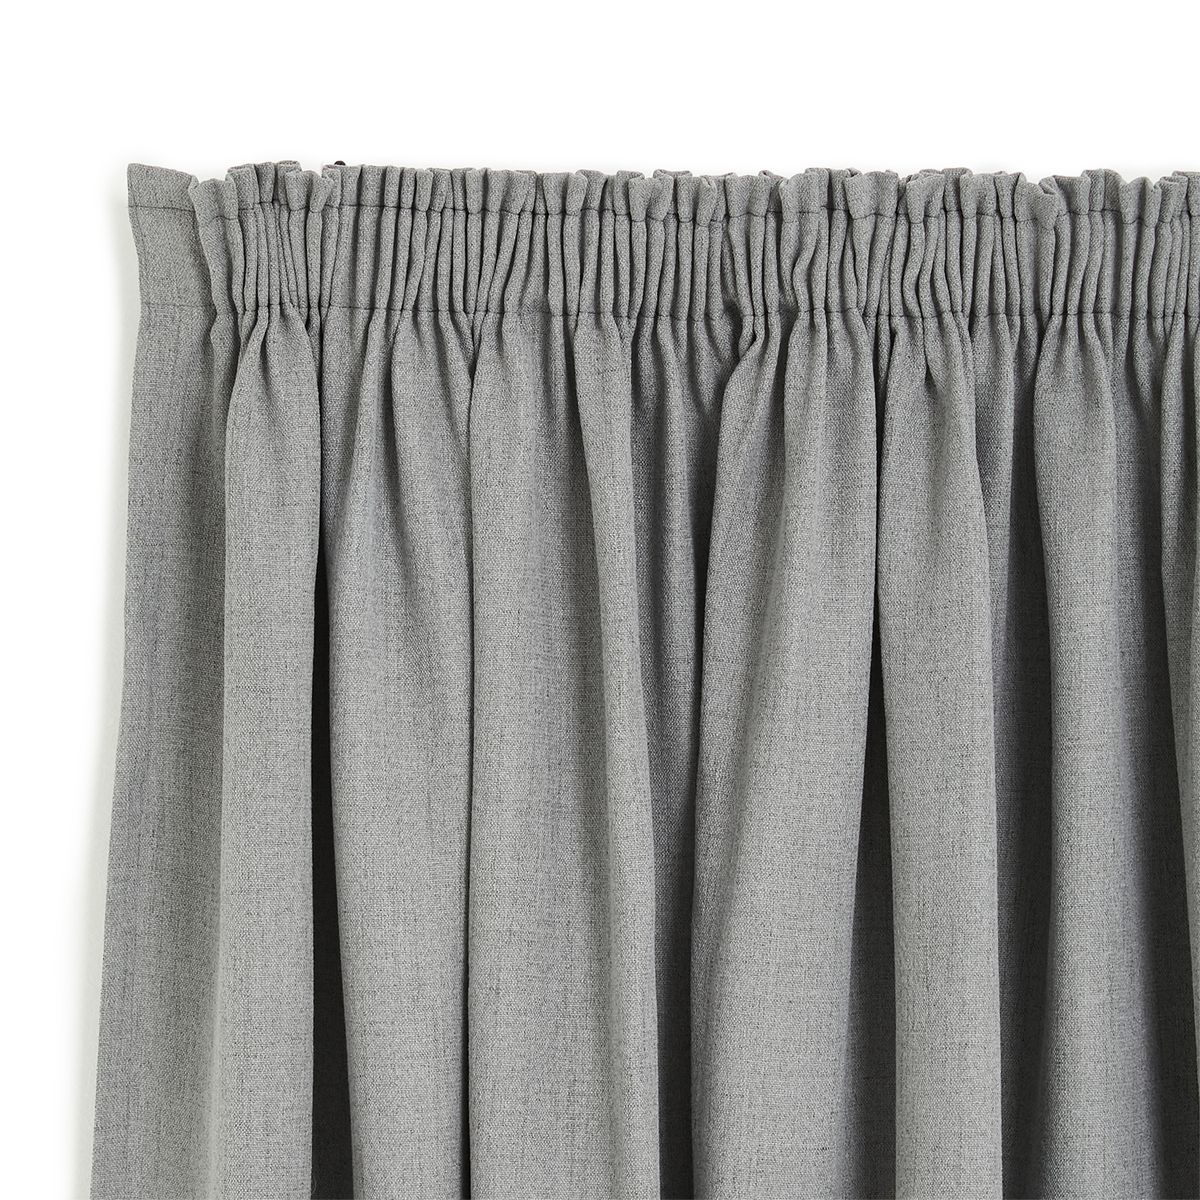 George & Mason - Meridian 230x218cm Taped Curtain | Buy Online in South ...